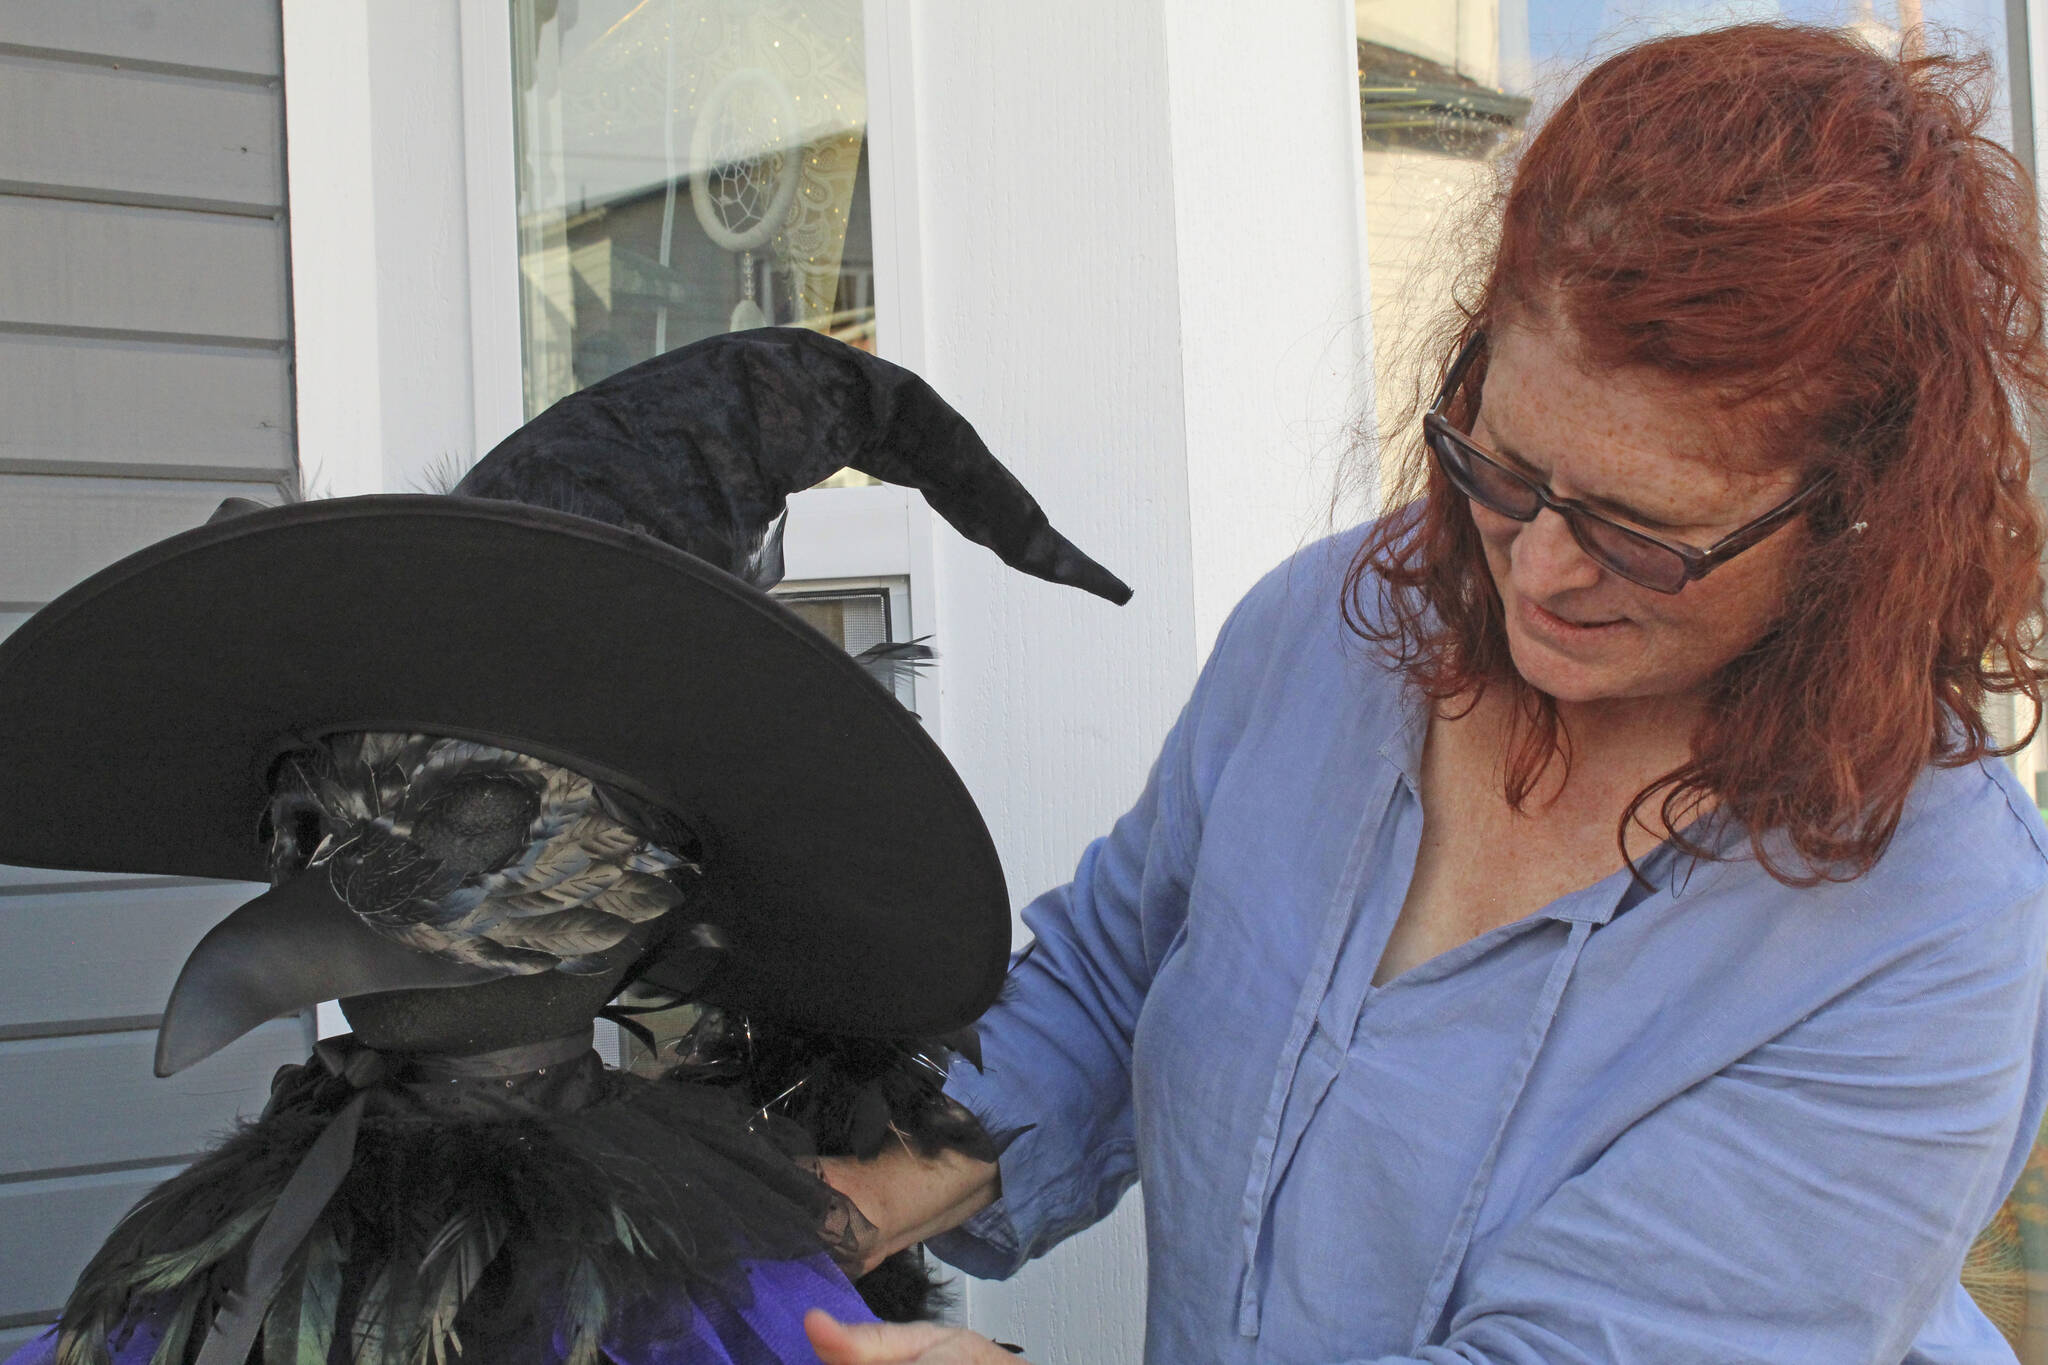 Photos by Karina Andrew/Whidbey News-Times
Mel Rodman makes some adjustments to the human-sized crow that represents her business, Crow’s Roost, in her Scarecrow Trail display.